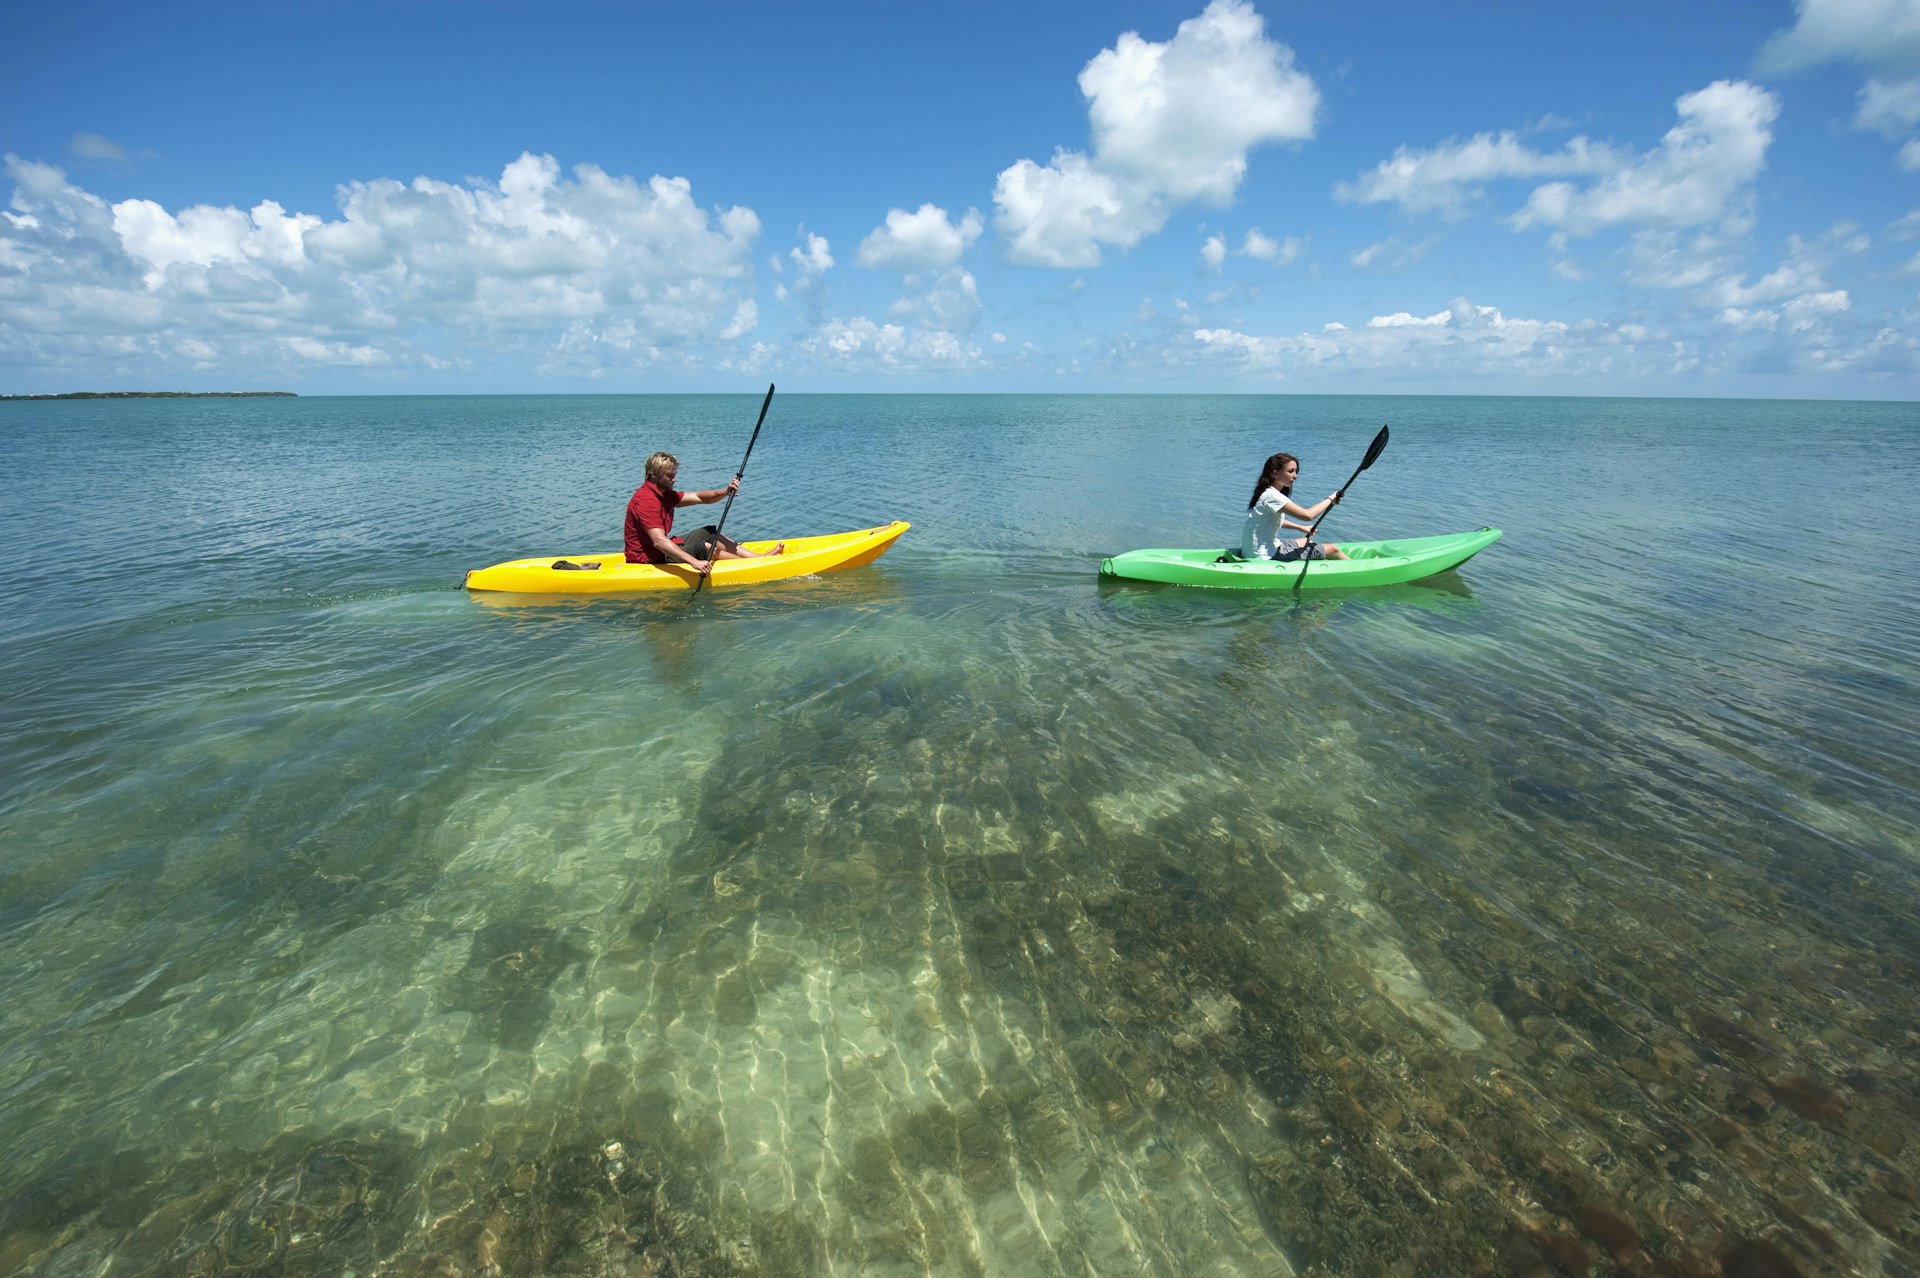 A man and woman kayak in calm waters